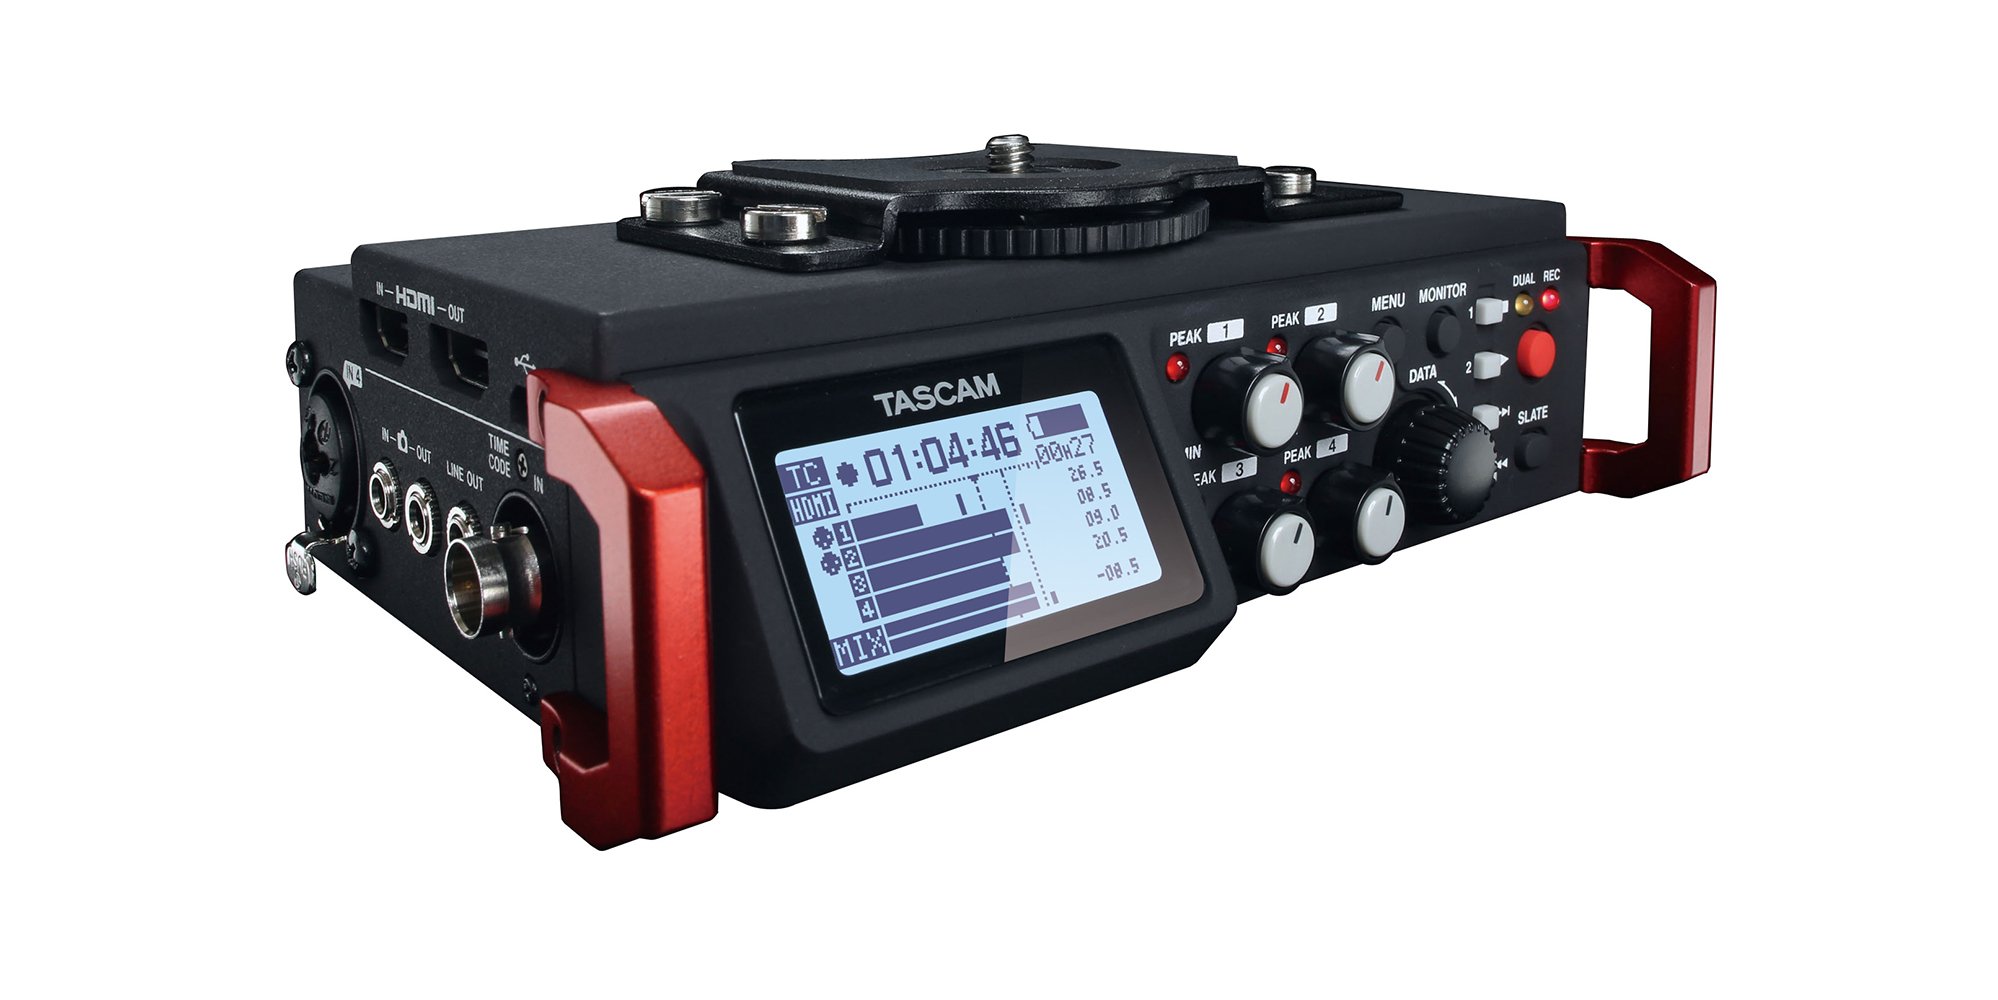 Tascam DR-701D 6-Track Linear PCM Recorder For DSLR Camera Production | Compass Systems